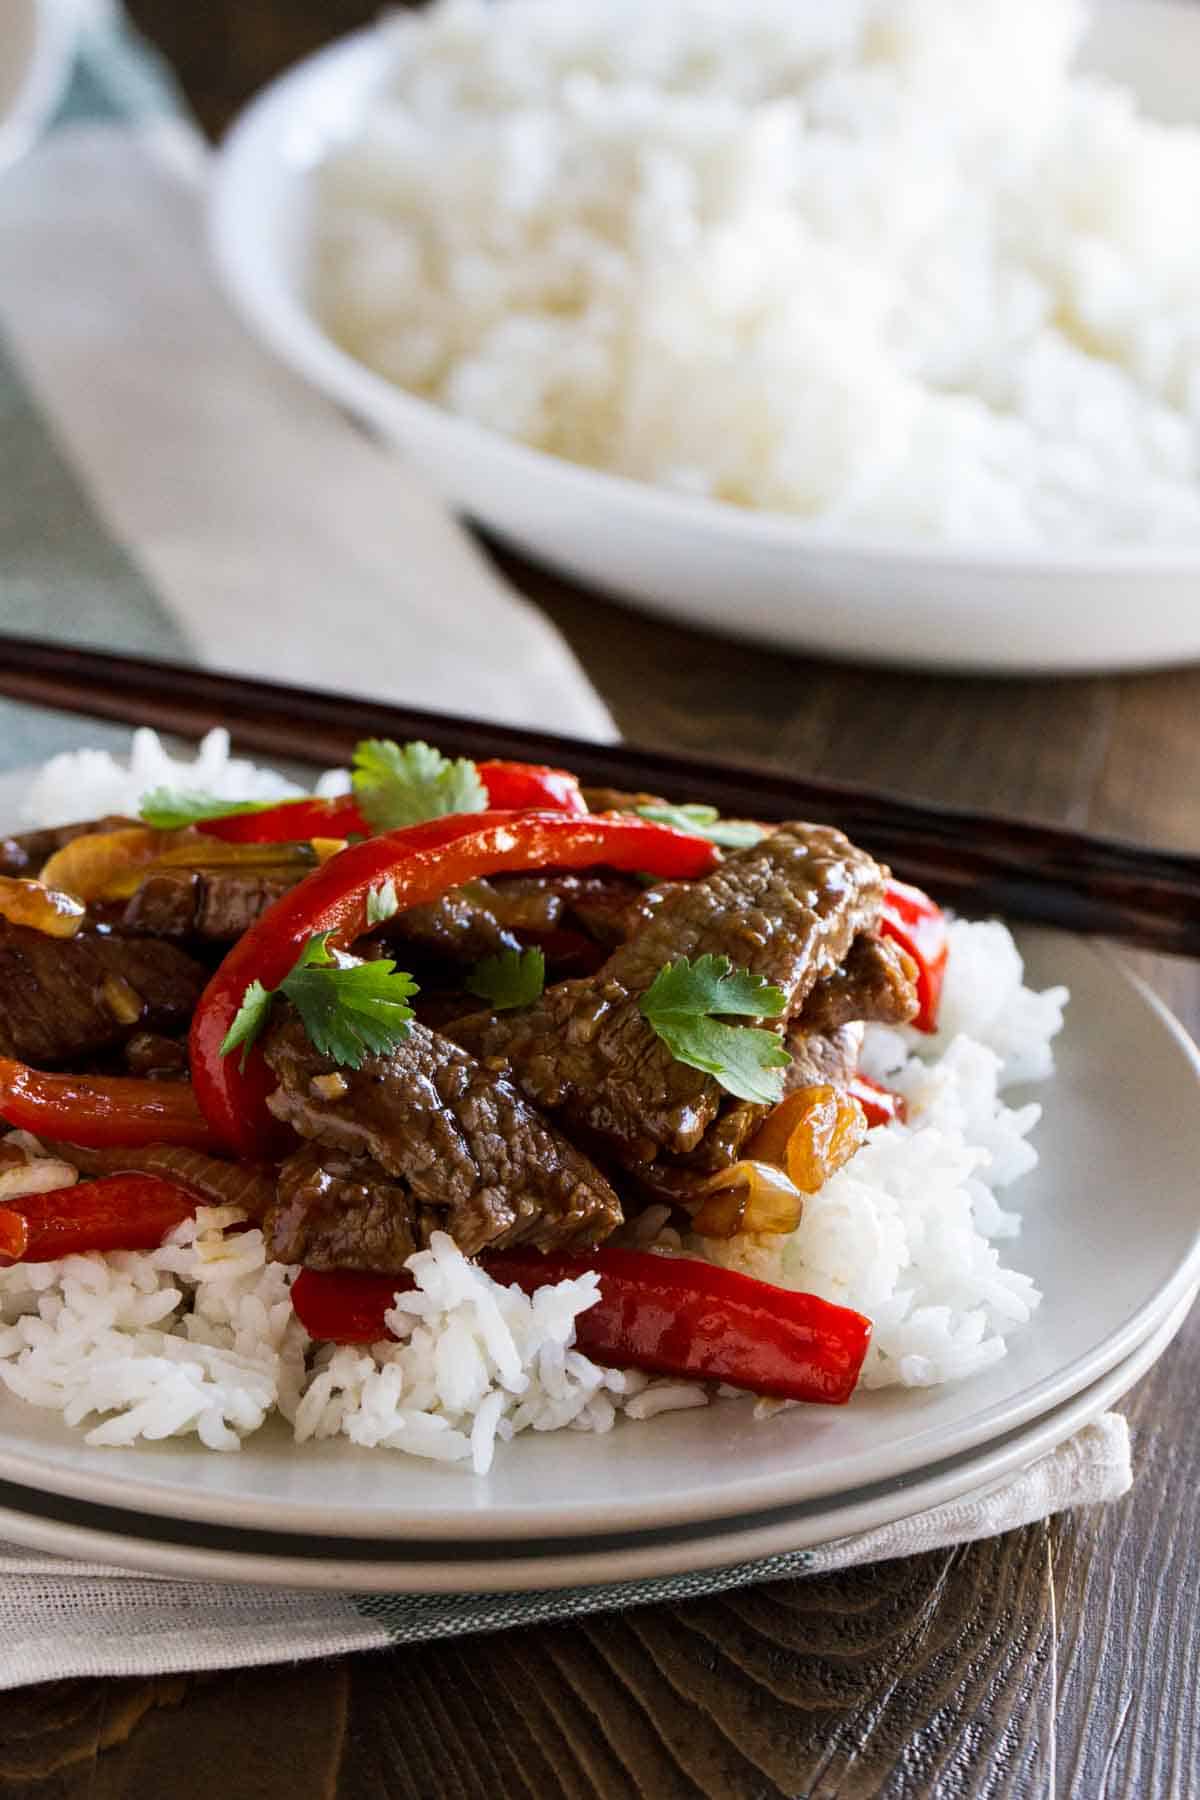 Plate with a serving of rice topped with steak stir fry